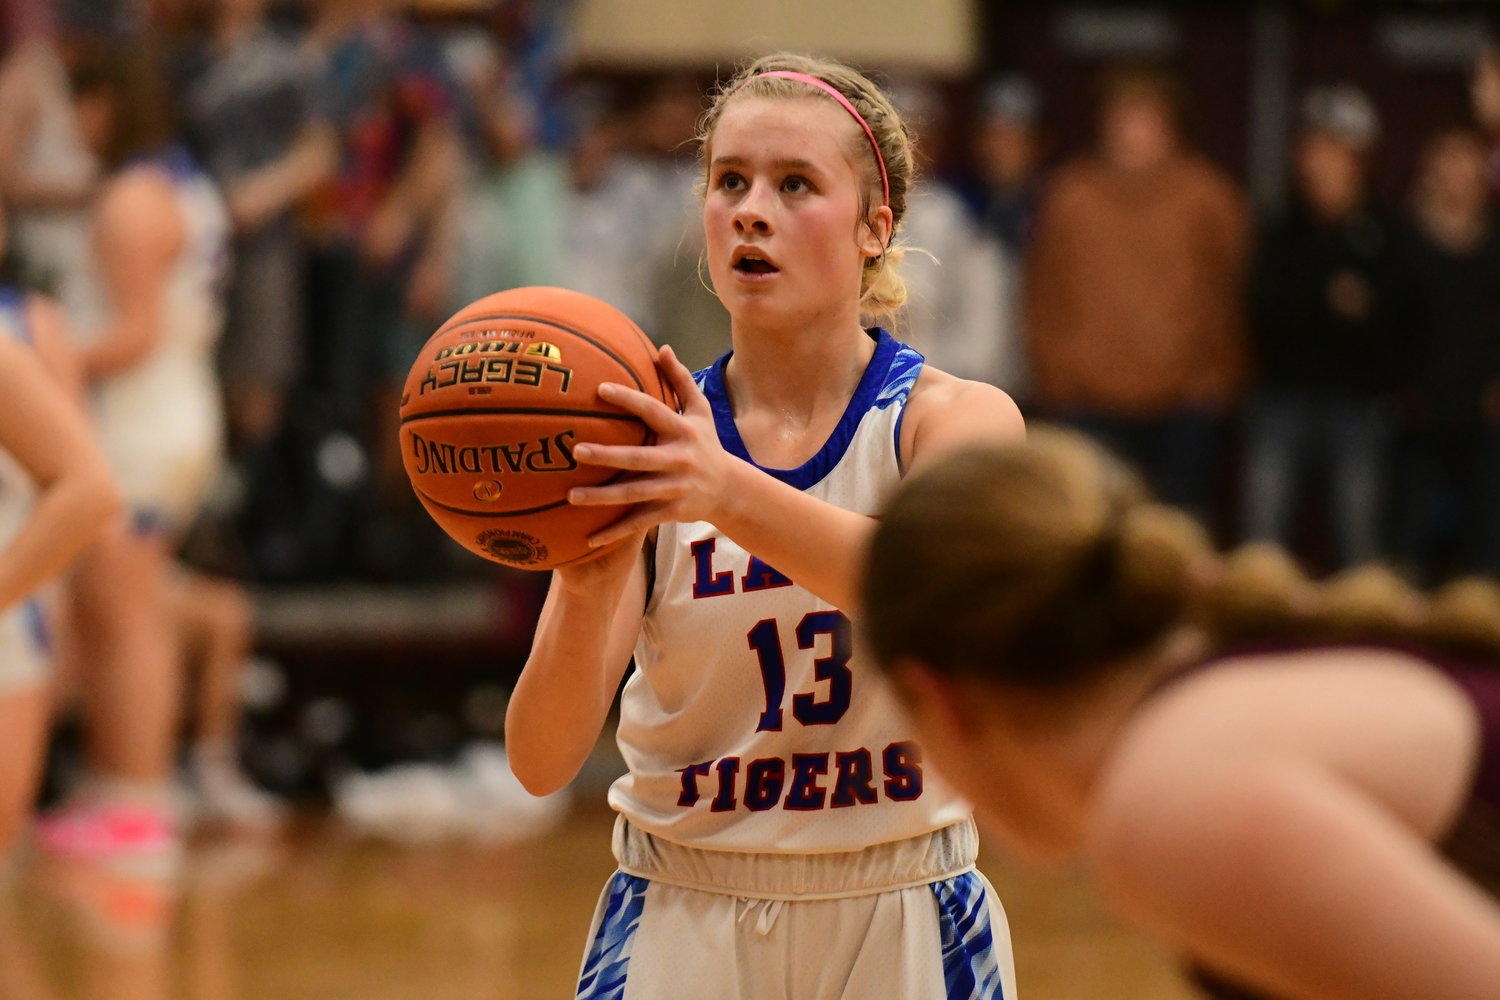 Scotland County's Hannah Feeney gets set for a free-throw attempt during a Class 2 district title game against Schuyler County.